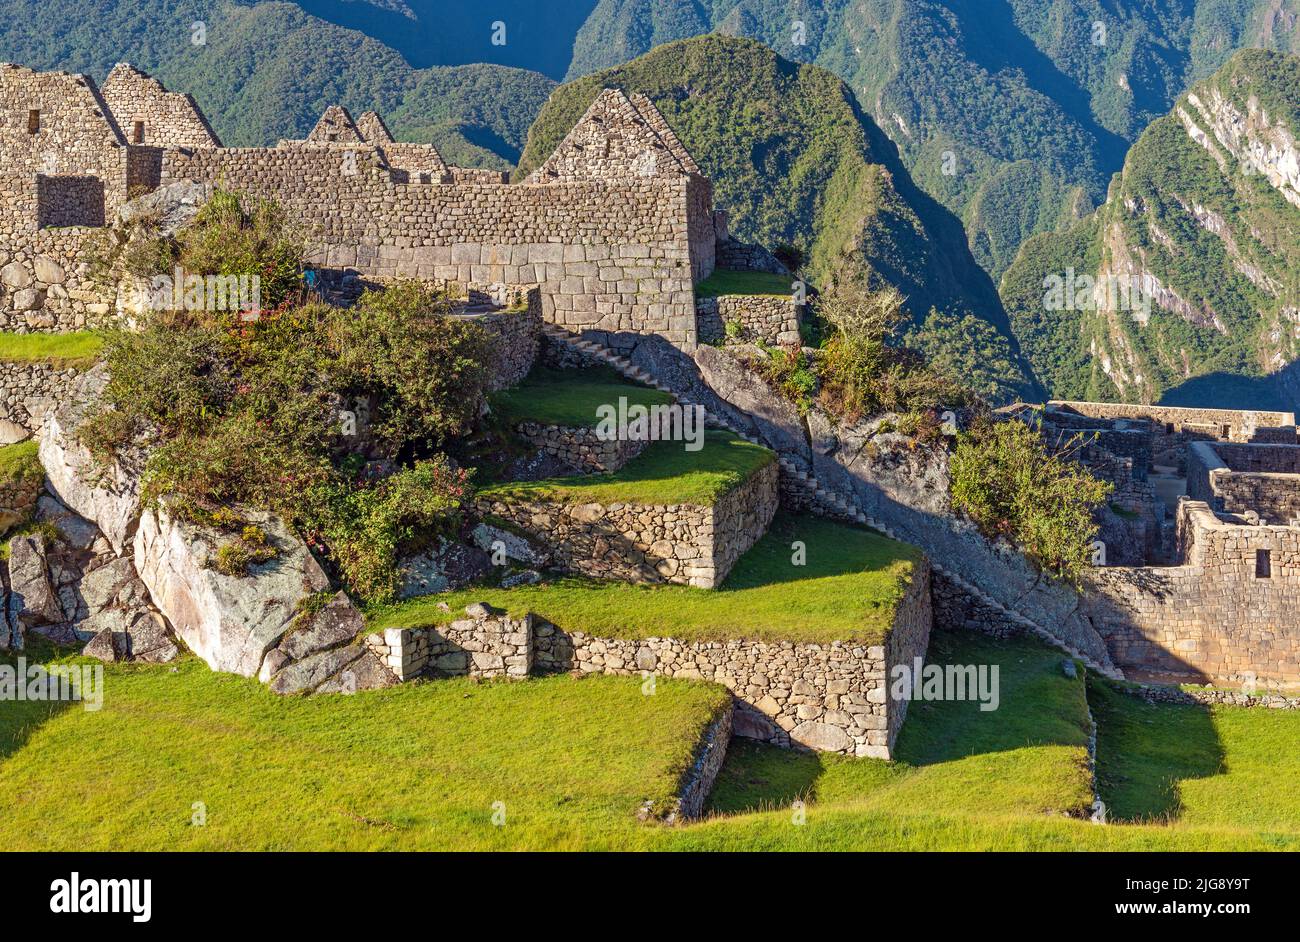 Machu Picchu architecture with stairs, walls, houses and agriculture terraces, Machu Picchu historic Sanctuary, Cusco, Peru. Stock Photo